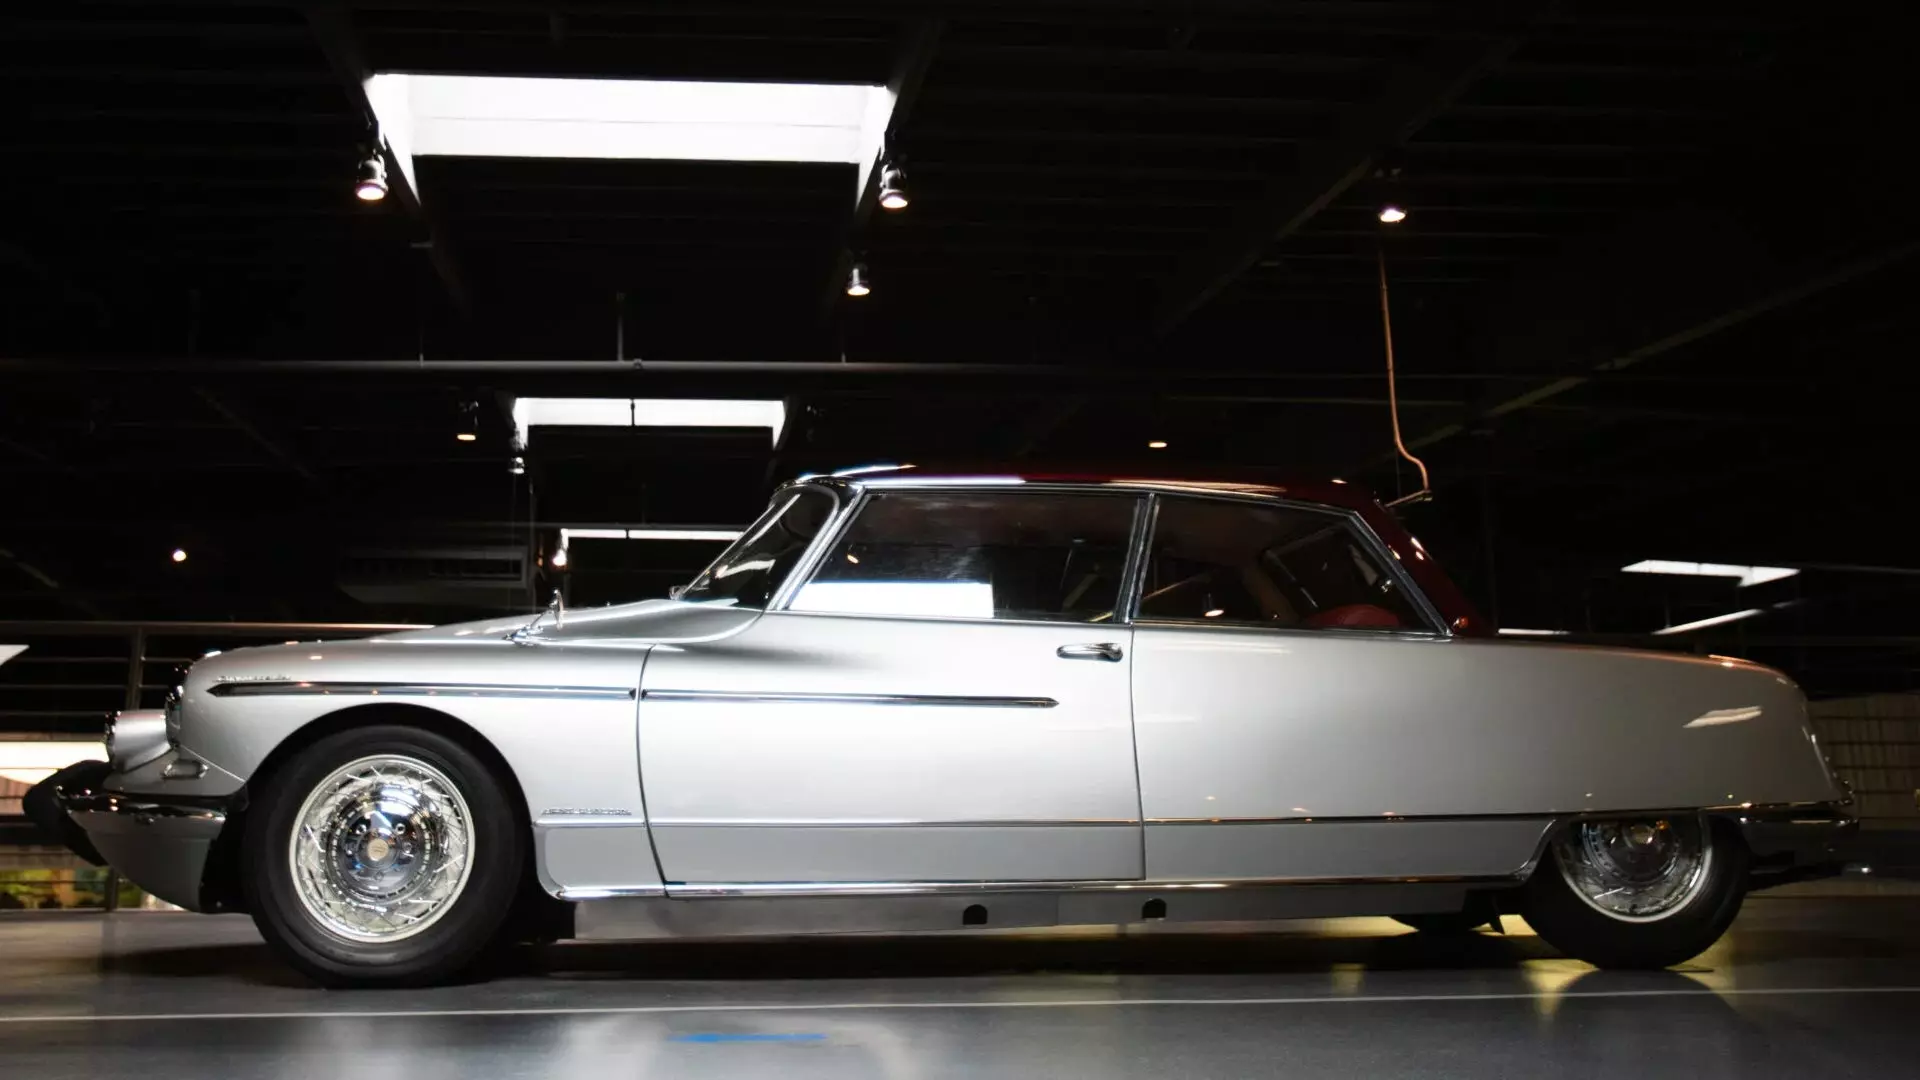 This Custom Citröen DS19 Is Almost Like a Two-Door Limo